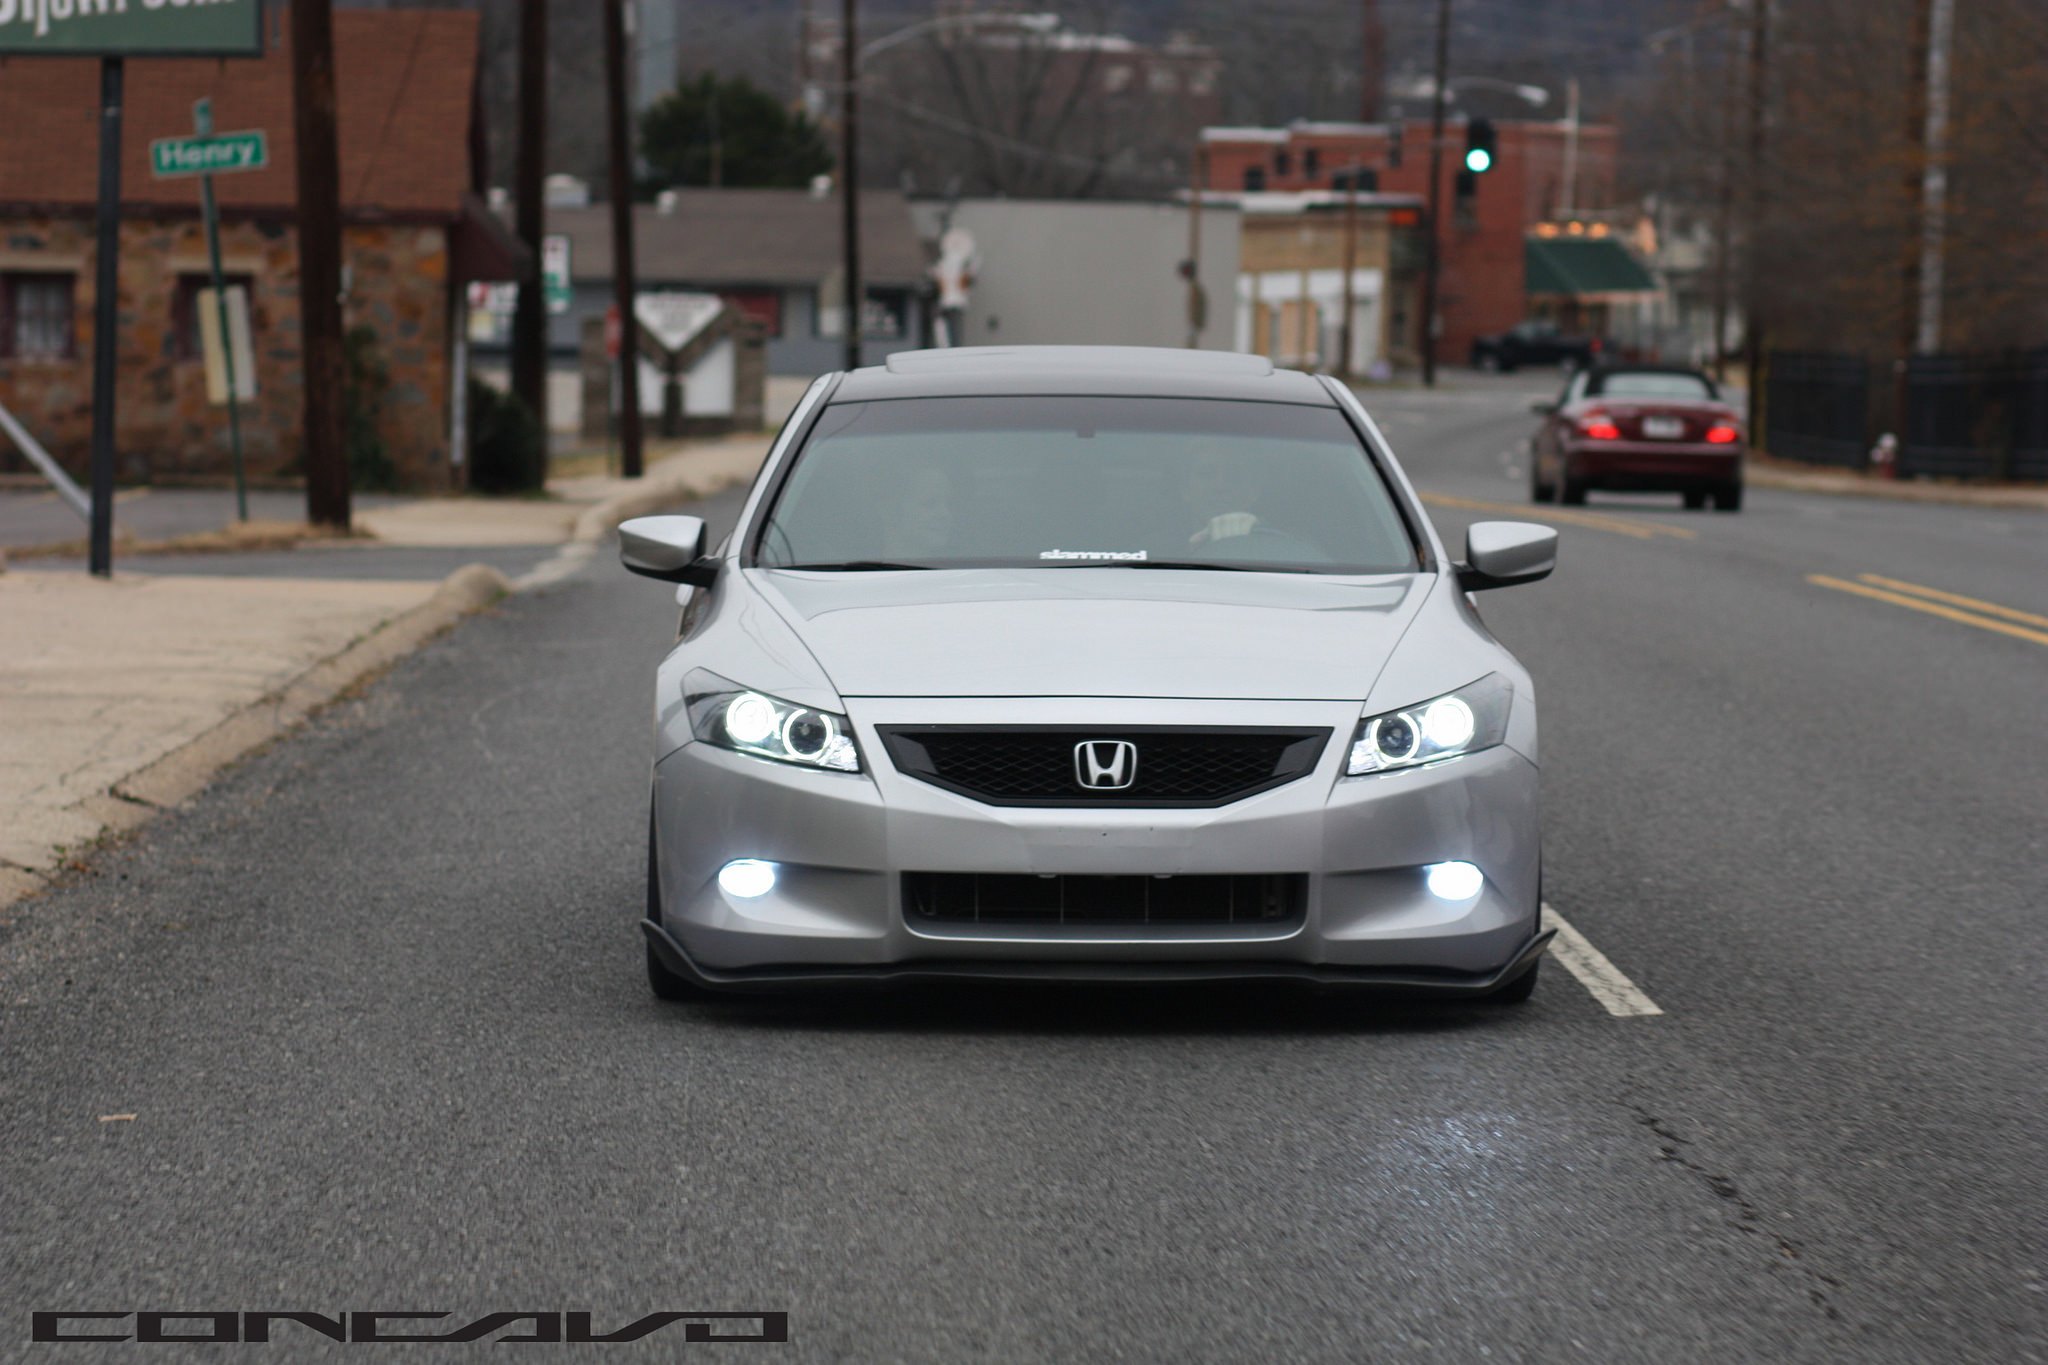 Stanced Honda Accord with Blacked Out Grille - Photo by Vossen